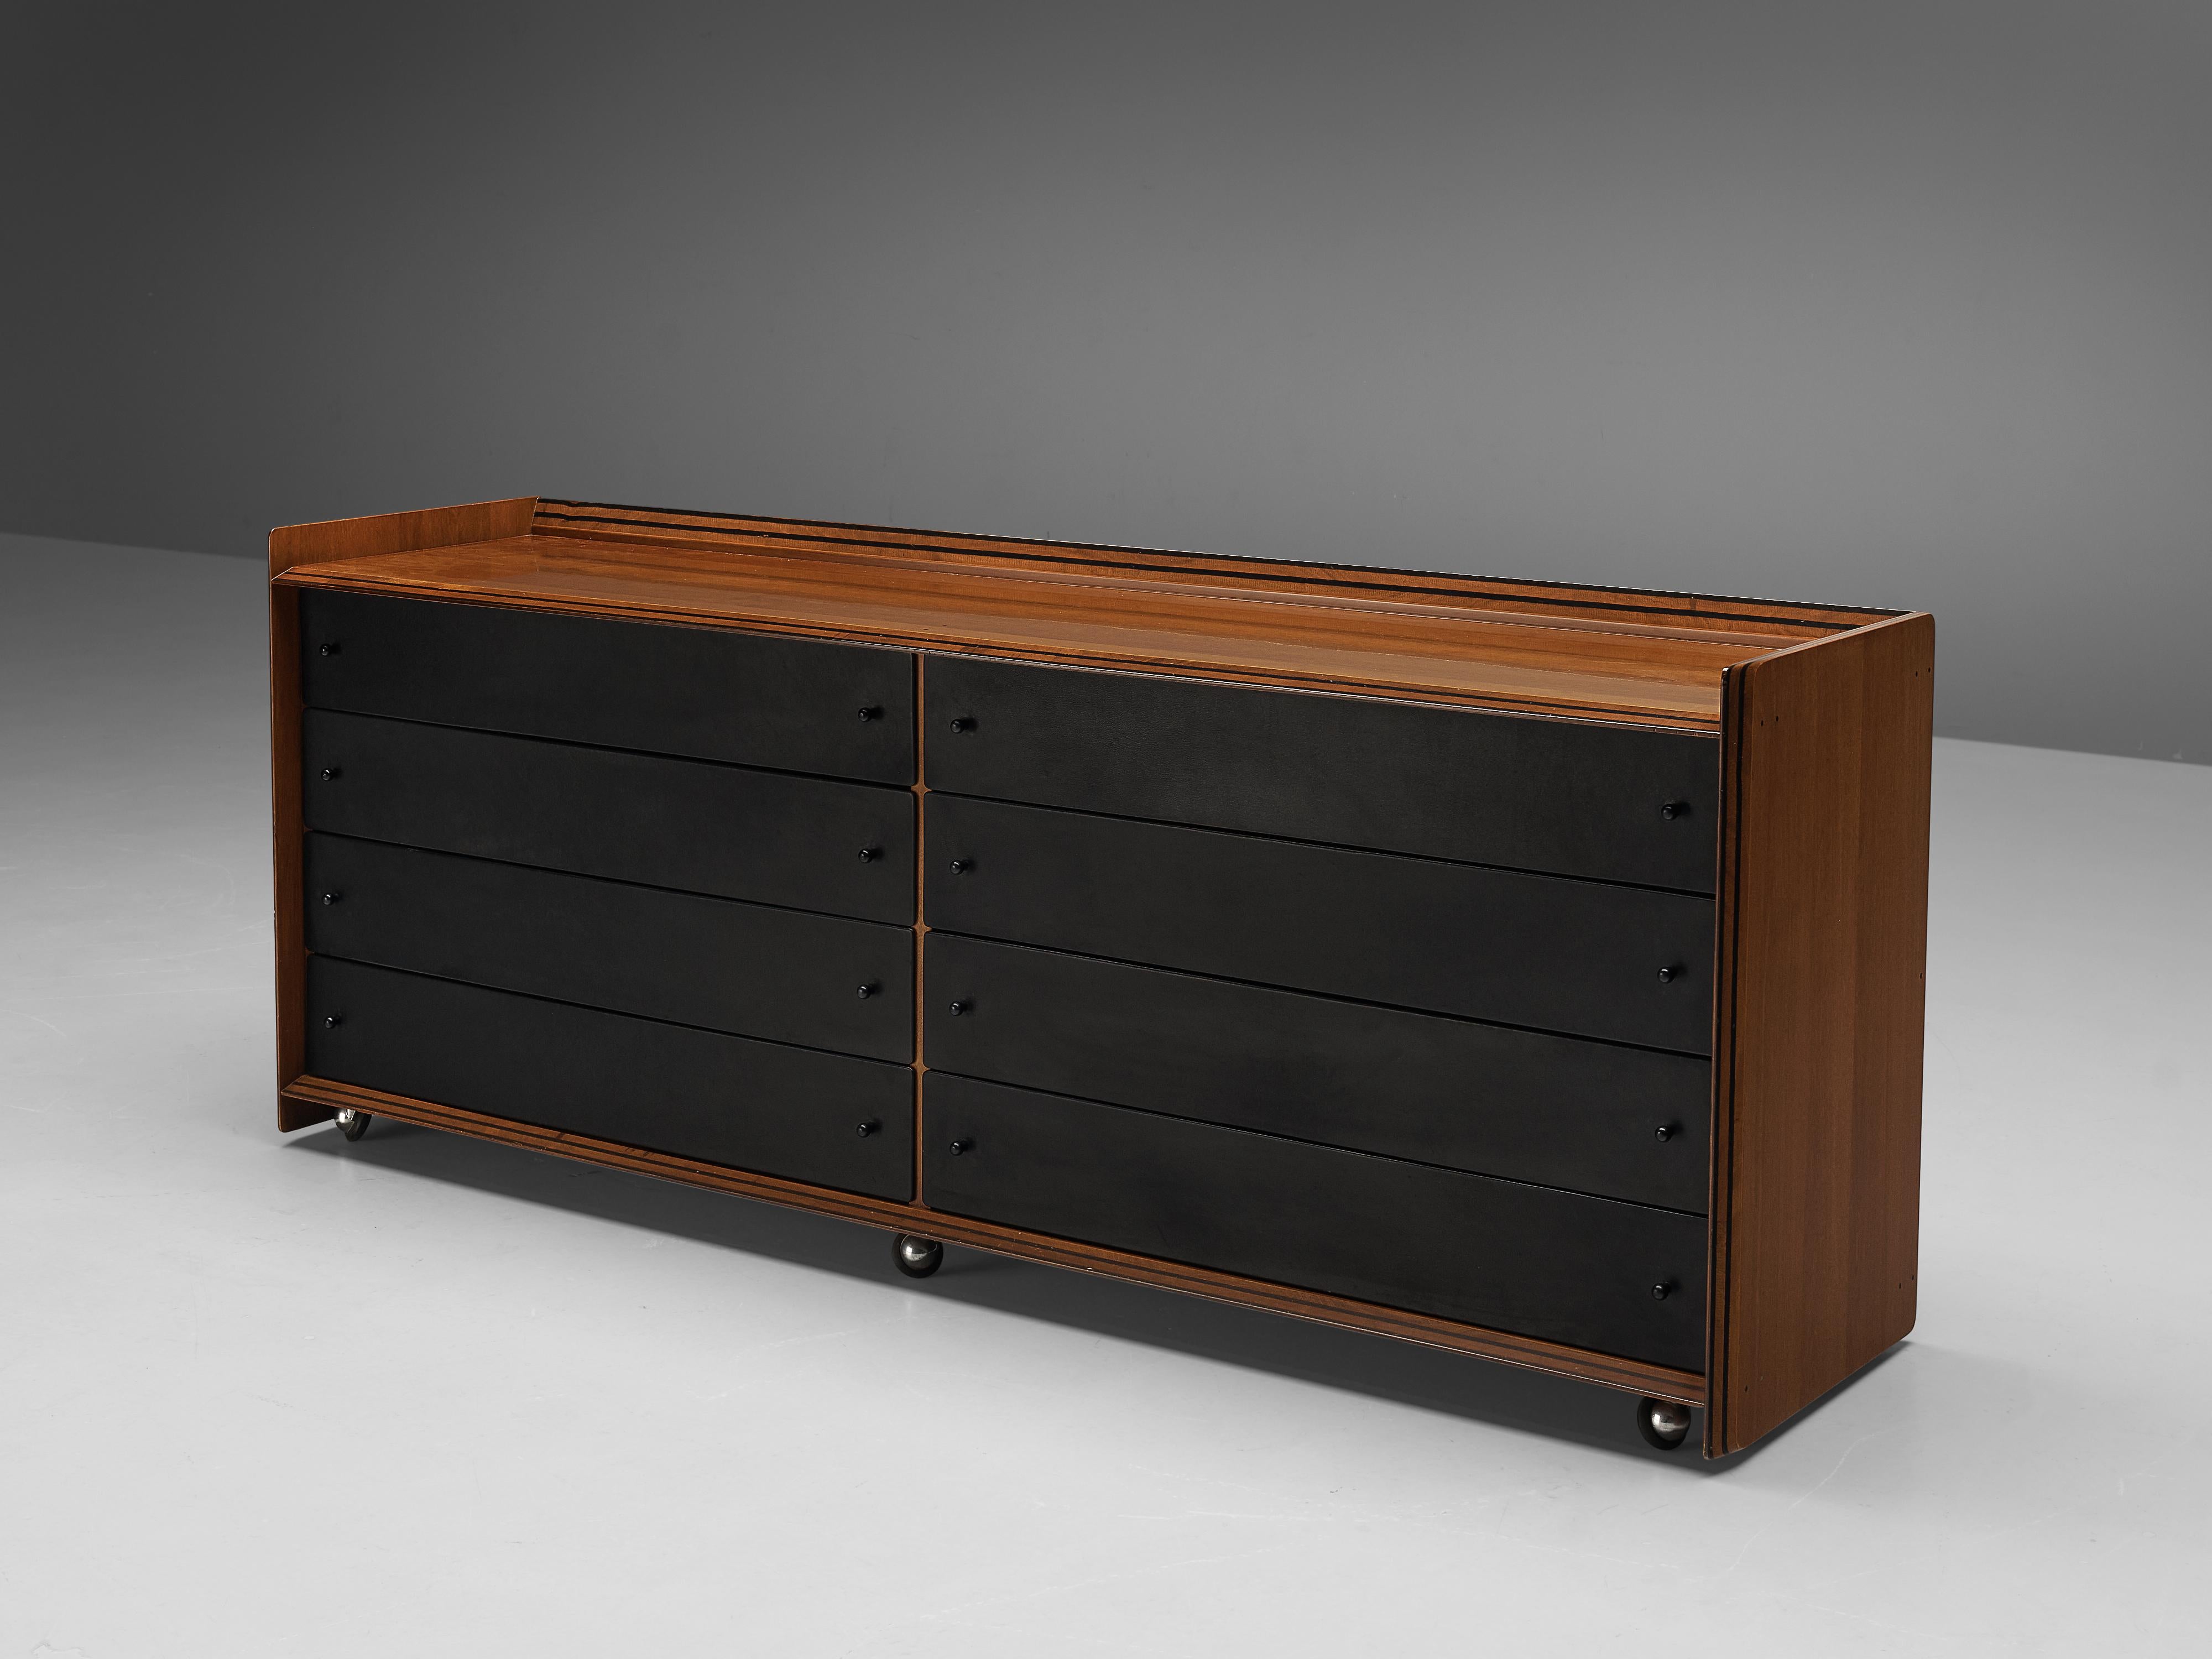 Afra & Tobia Scarpa, chest of drawers, walnut, leather, Italy, 1970s 

This chest of drawers with a front in black leather was designed as part of the ‘Artona’ line by Afra & Tobia Scarpa. It features a top. Eight drawers are covered with black